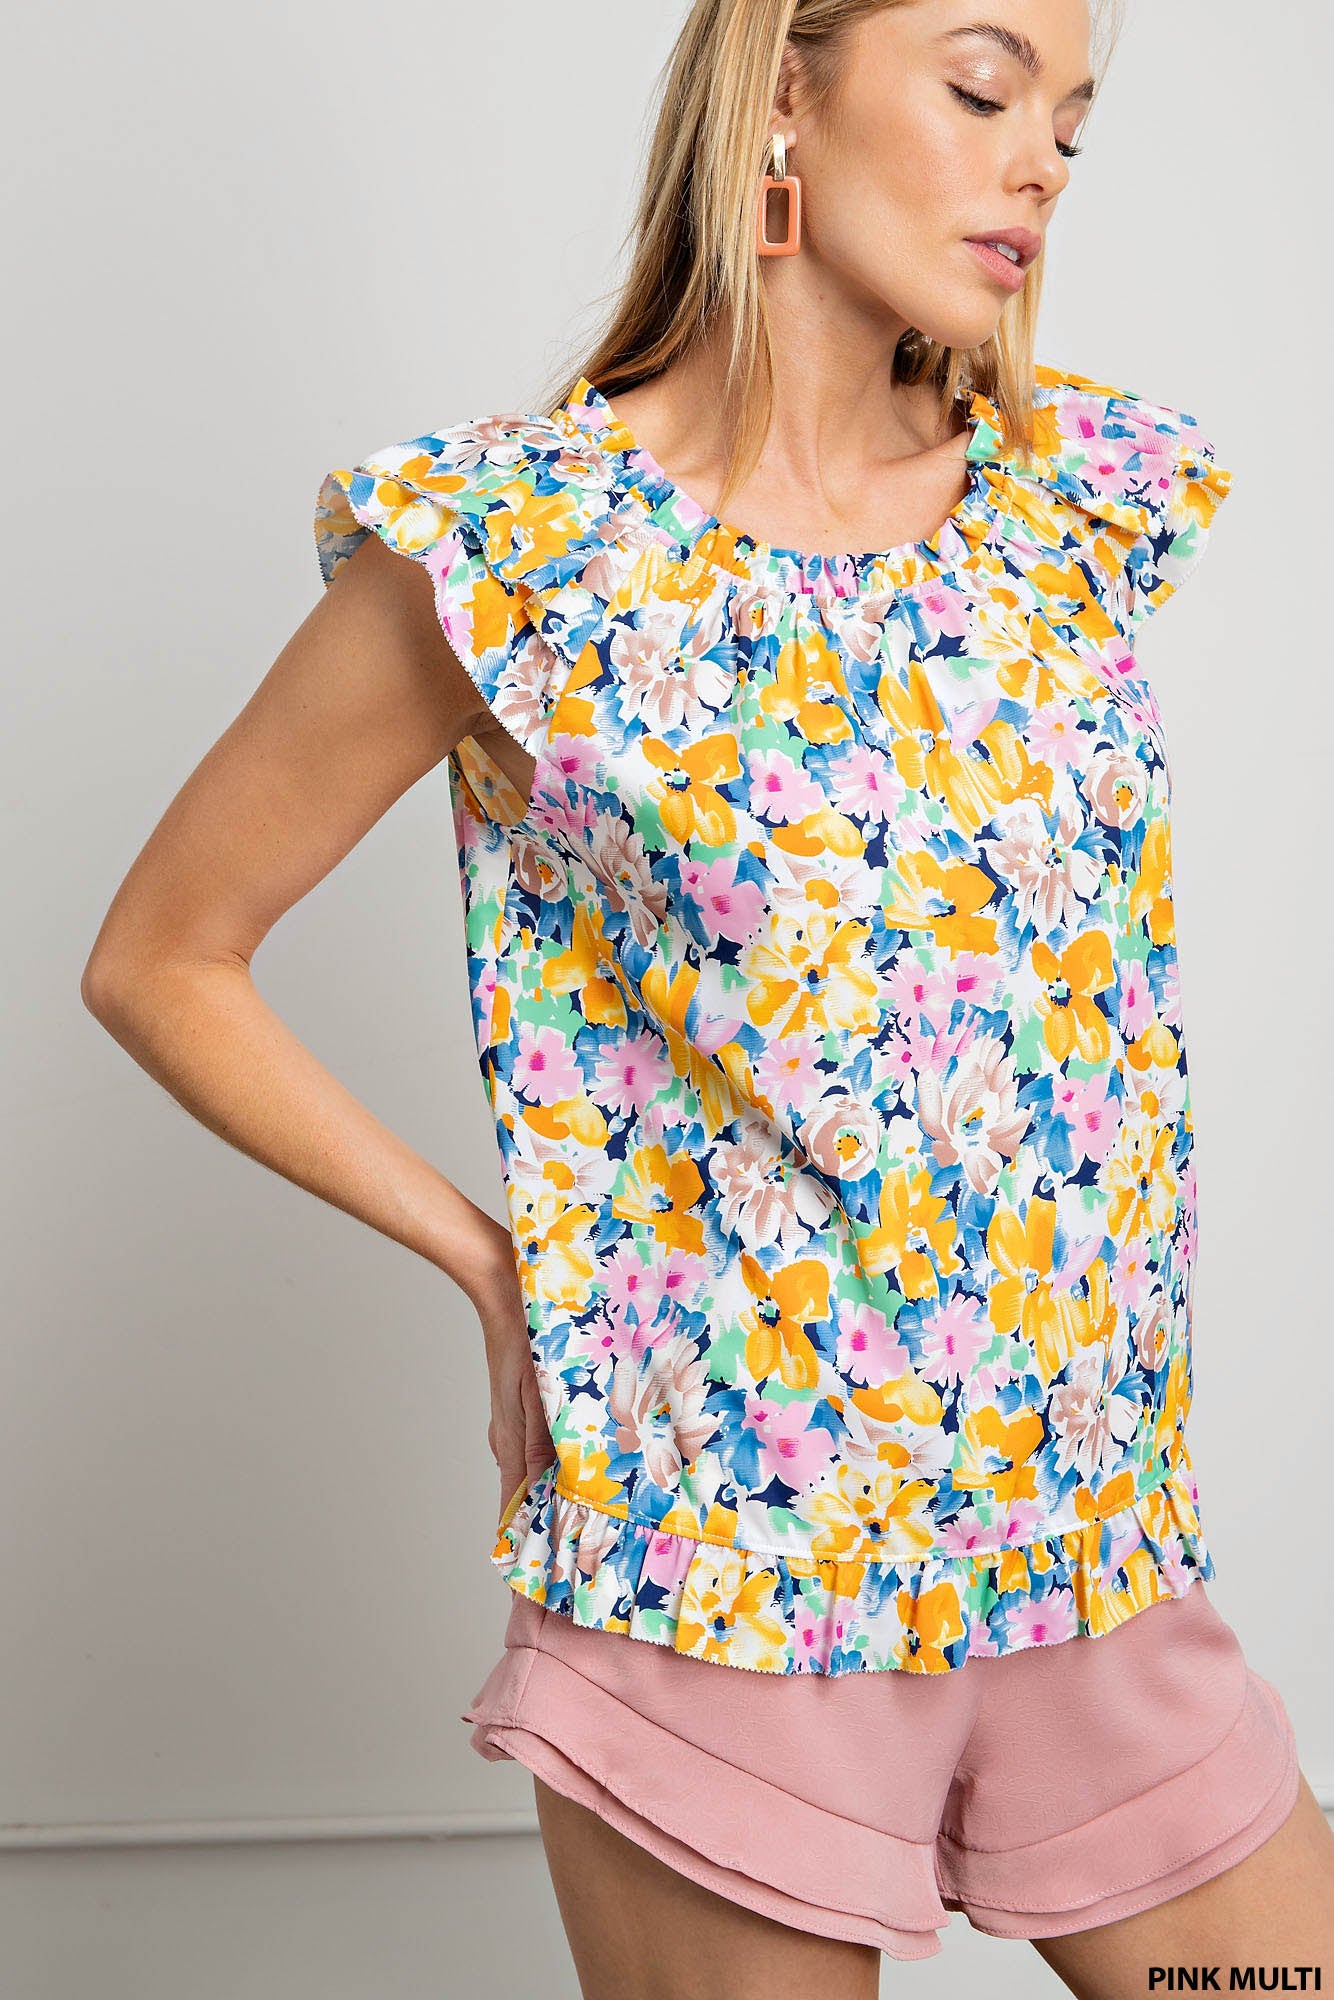 Poly printed fabric lined double layers ruffle sleeves top - multiple colors available Blouse Kori America   